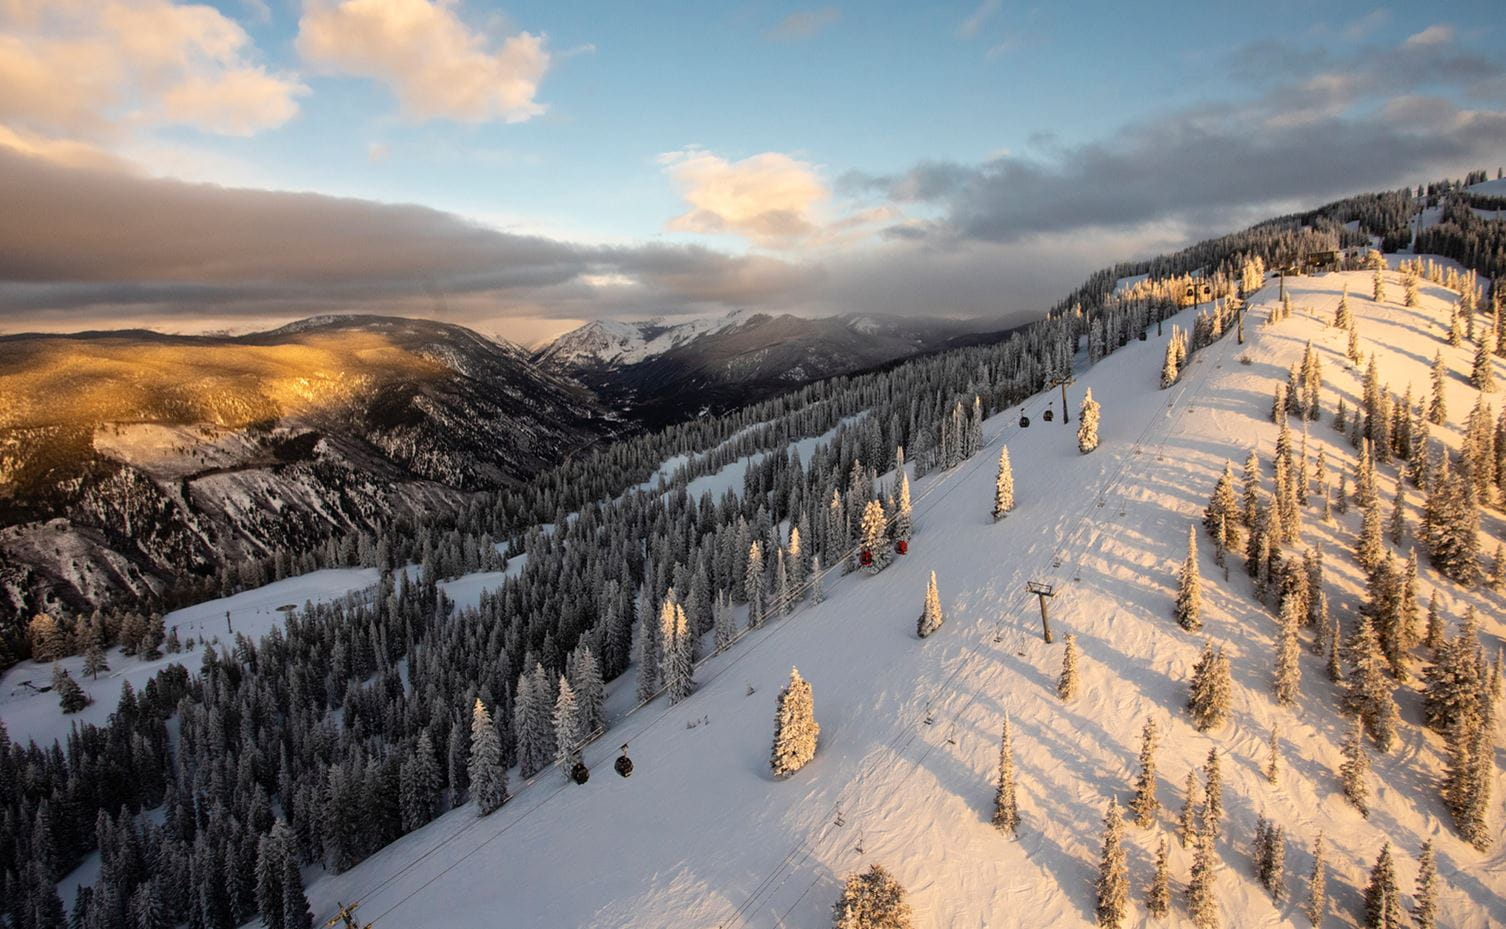 The ridge of Bell at Aspen Mountain at sunset